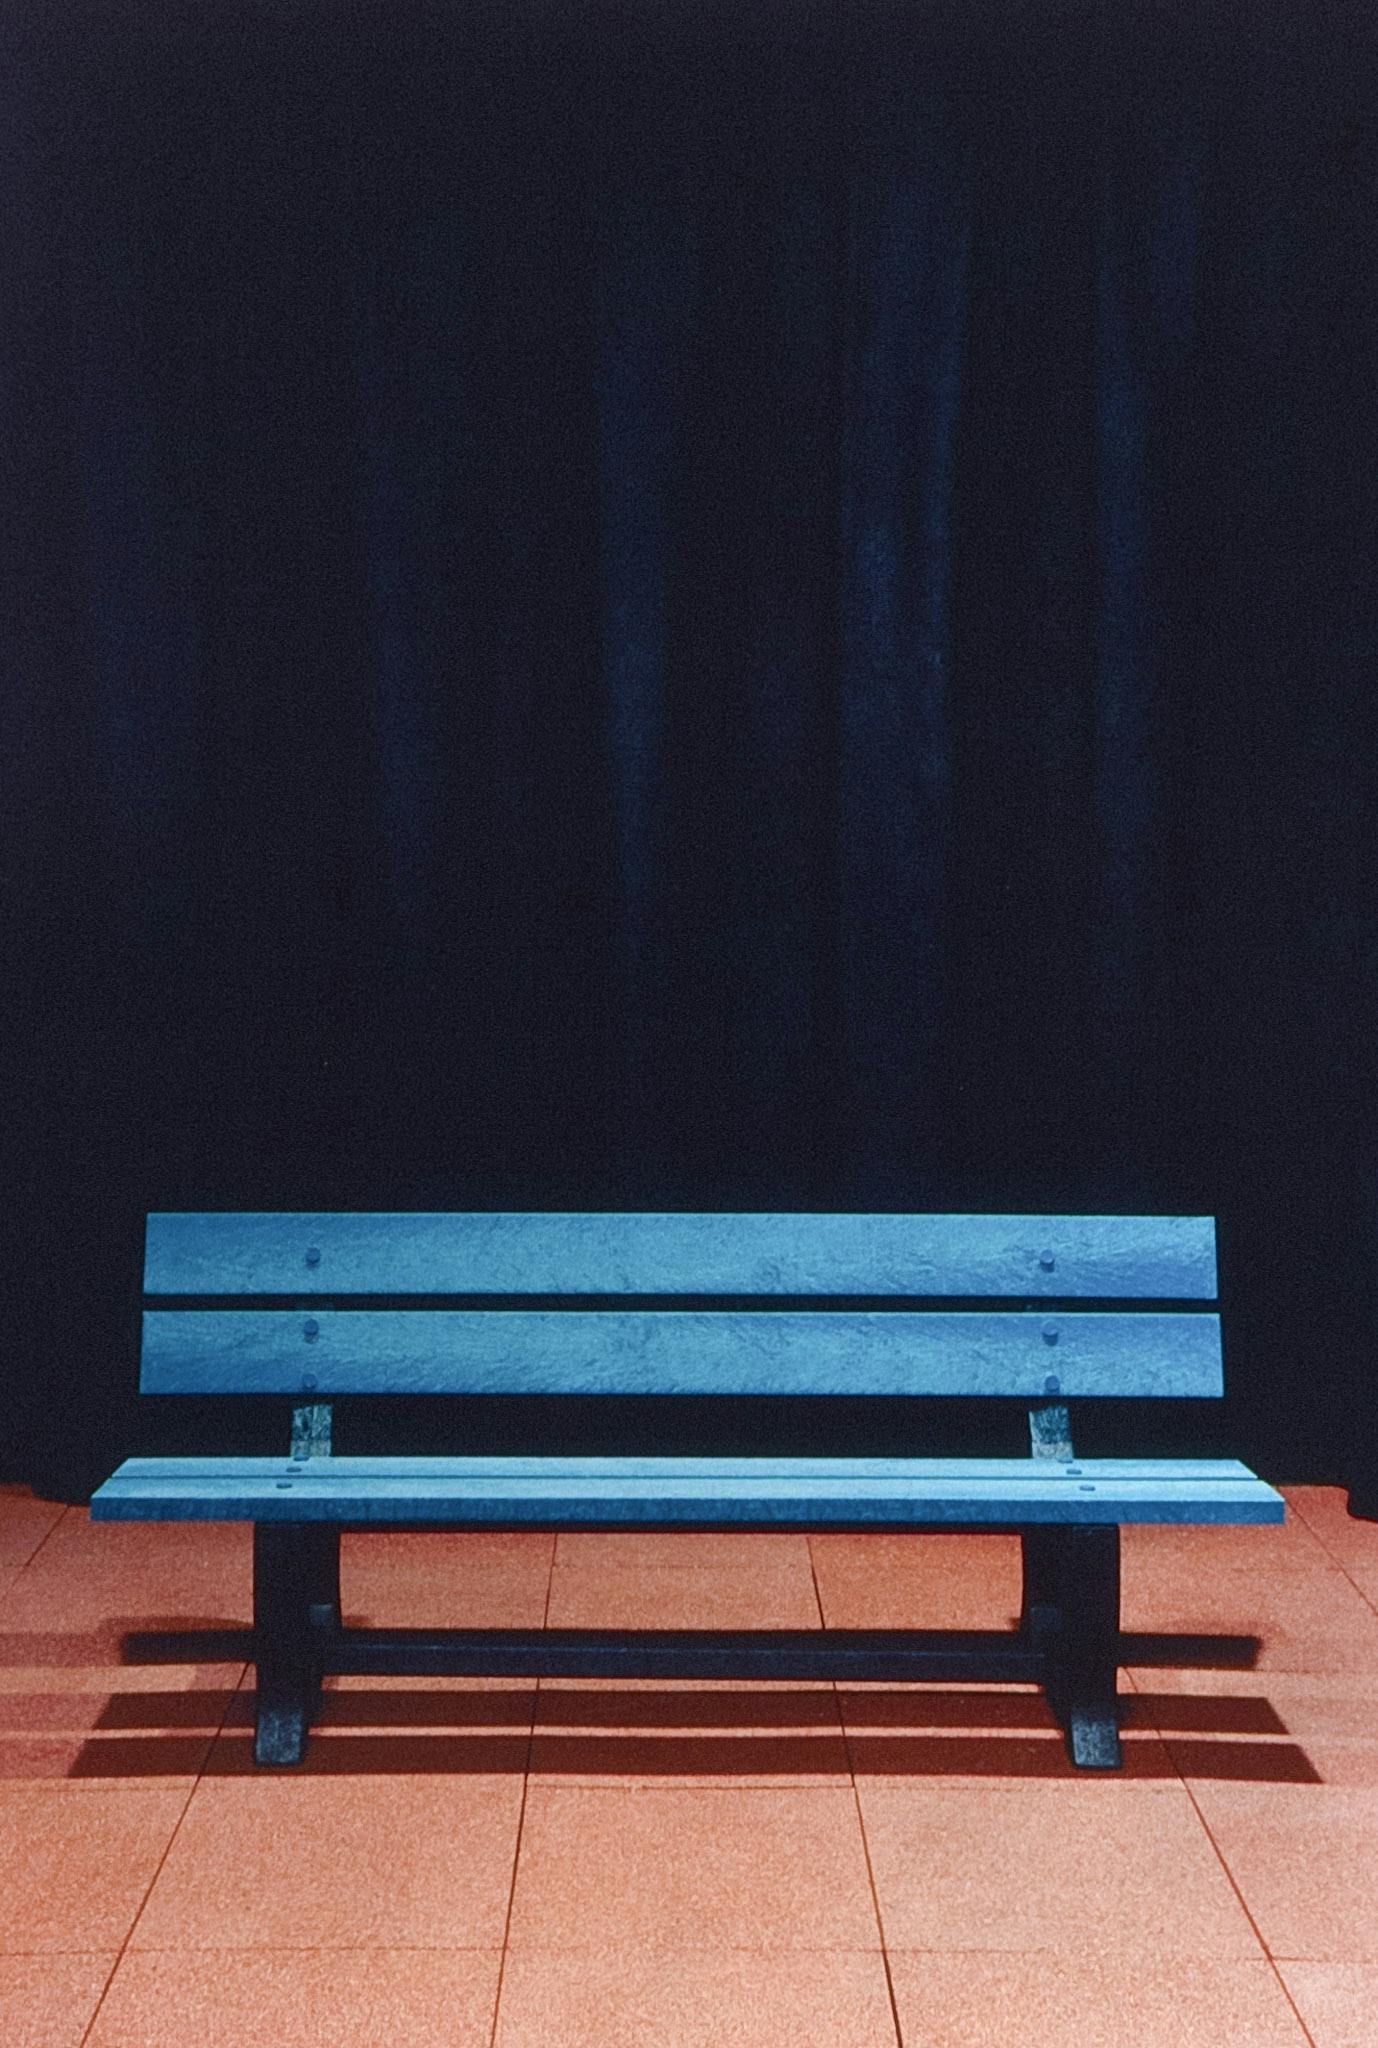 A blue wooden bench is installed in the gallery space. The background wall is covered by the navy blue curtain, and the gallery floor is covered by the oranger rubber tiles. 